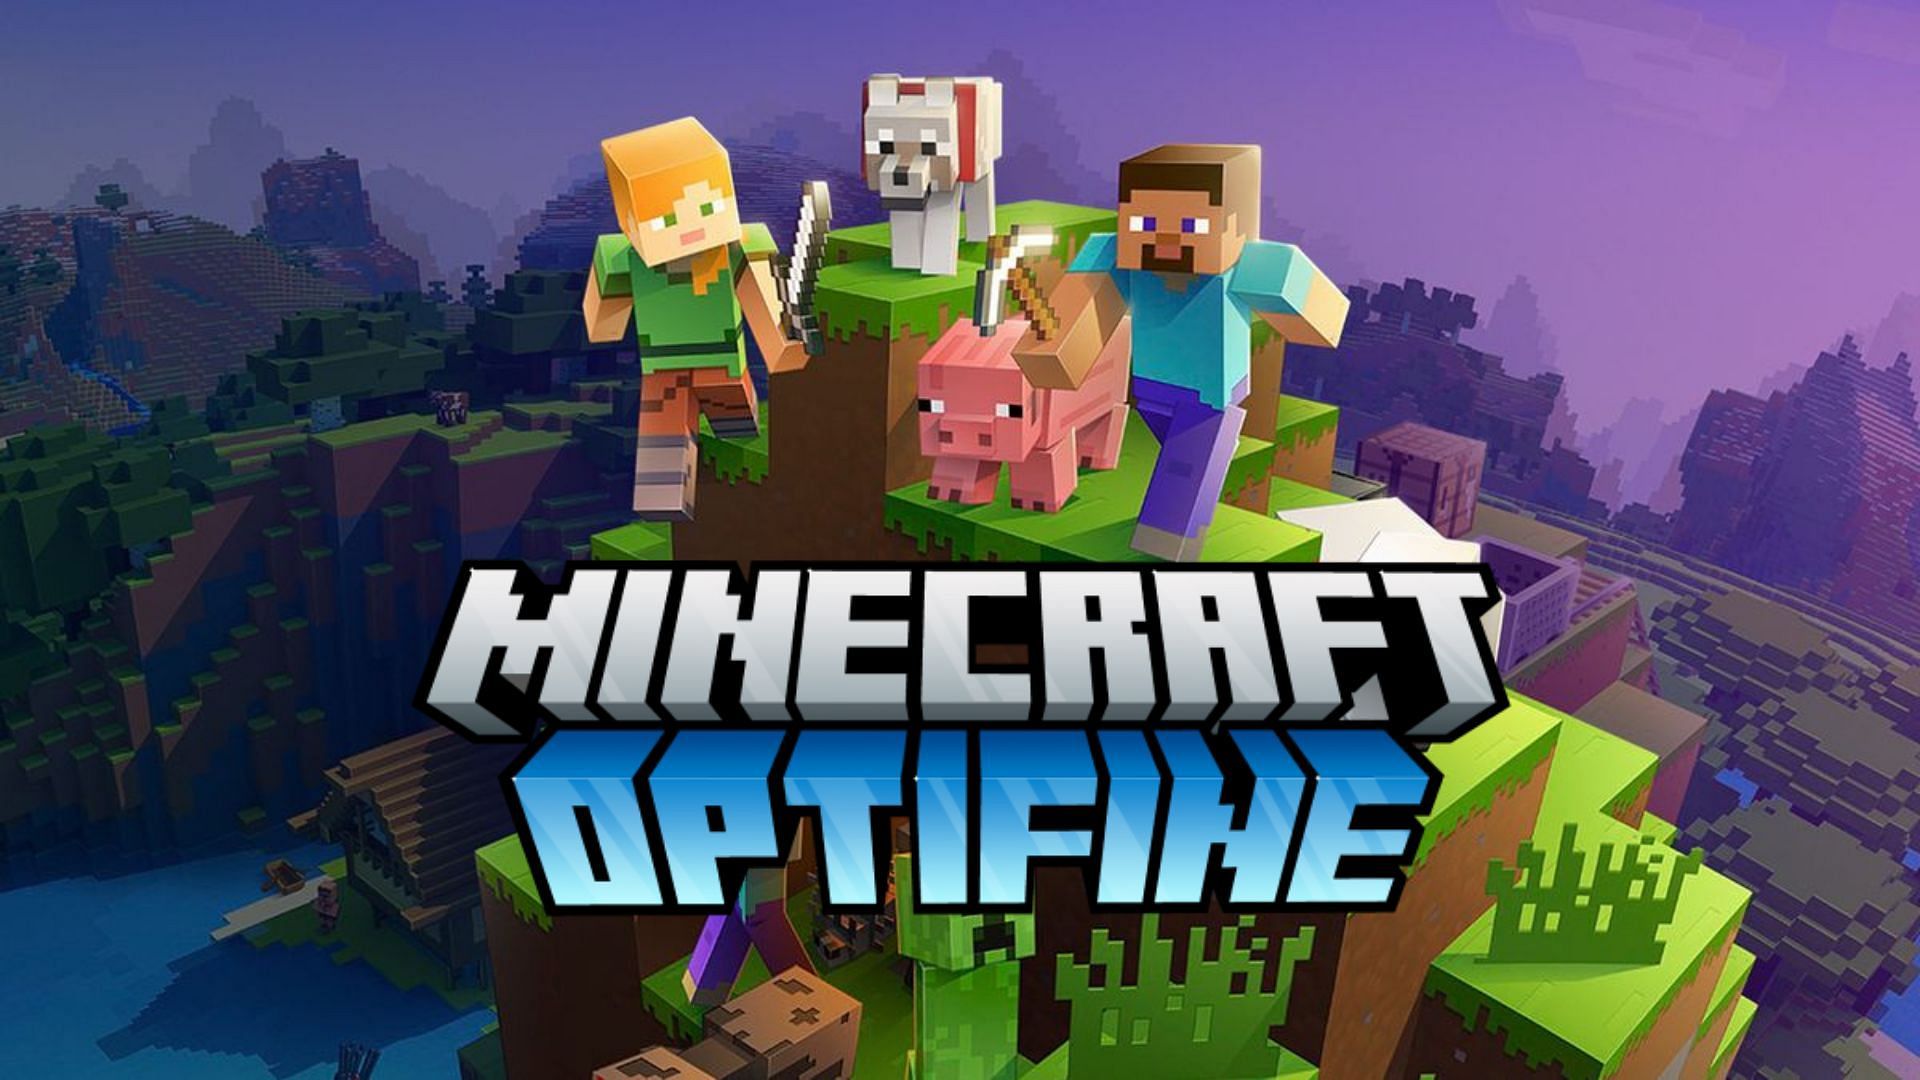 How to Install OptiFine in Minecraft 1.19 to Improve Performance